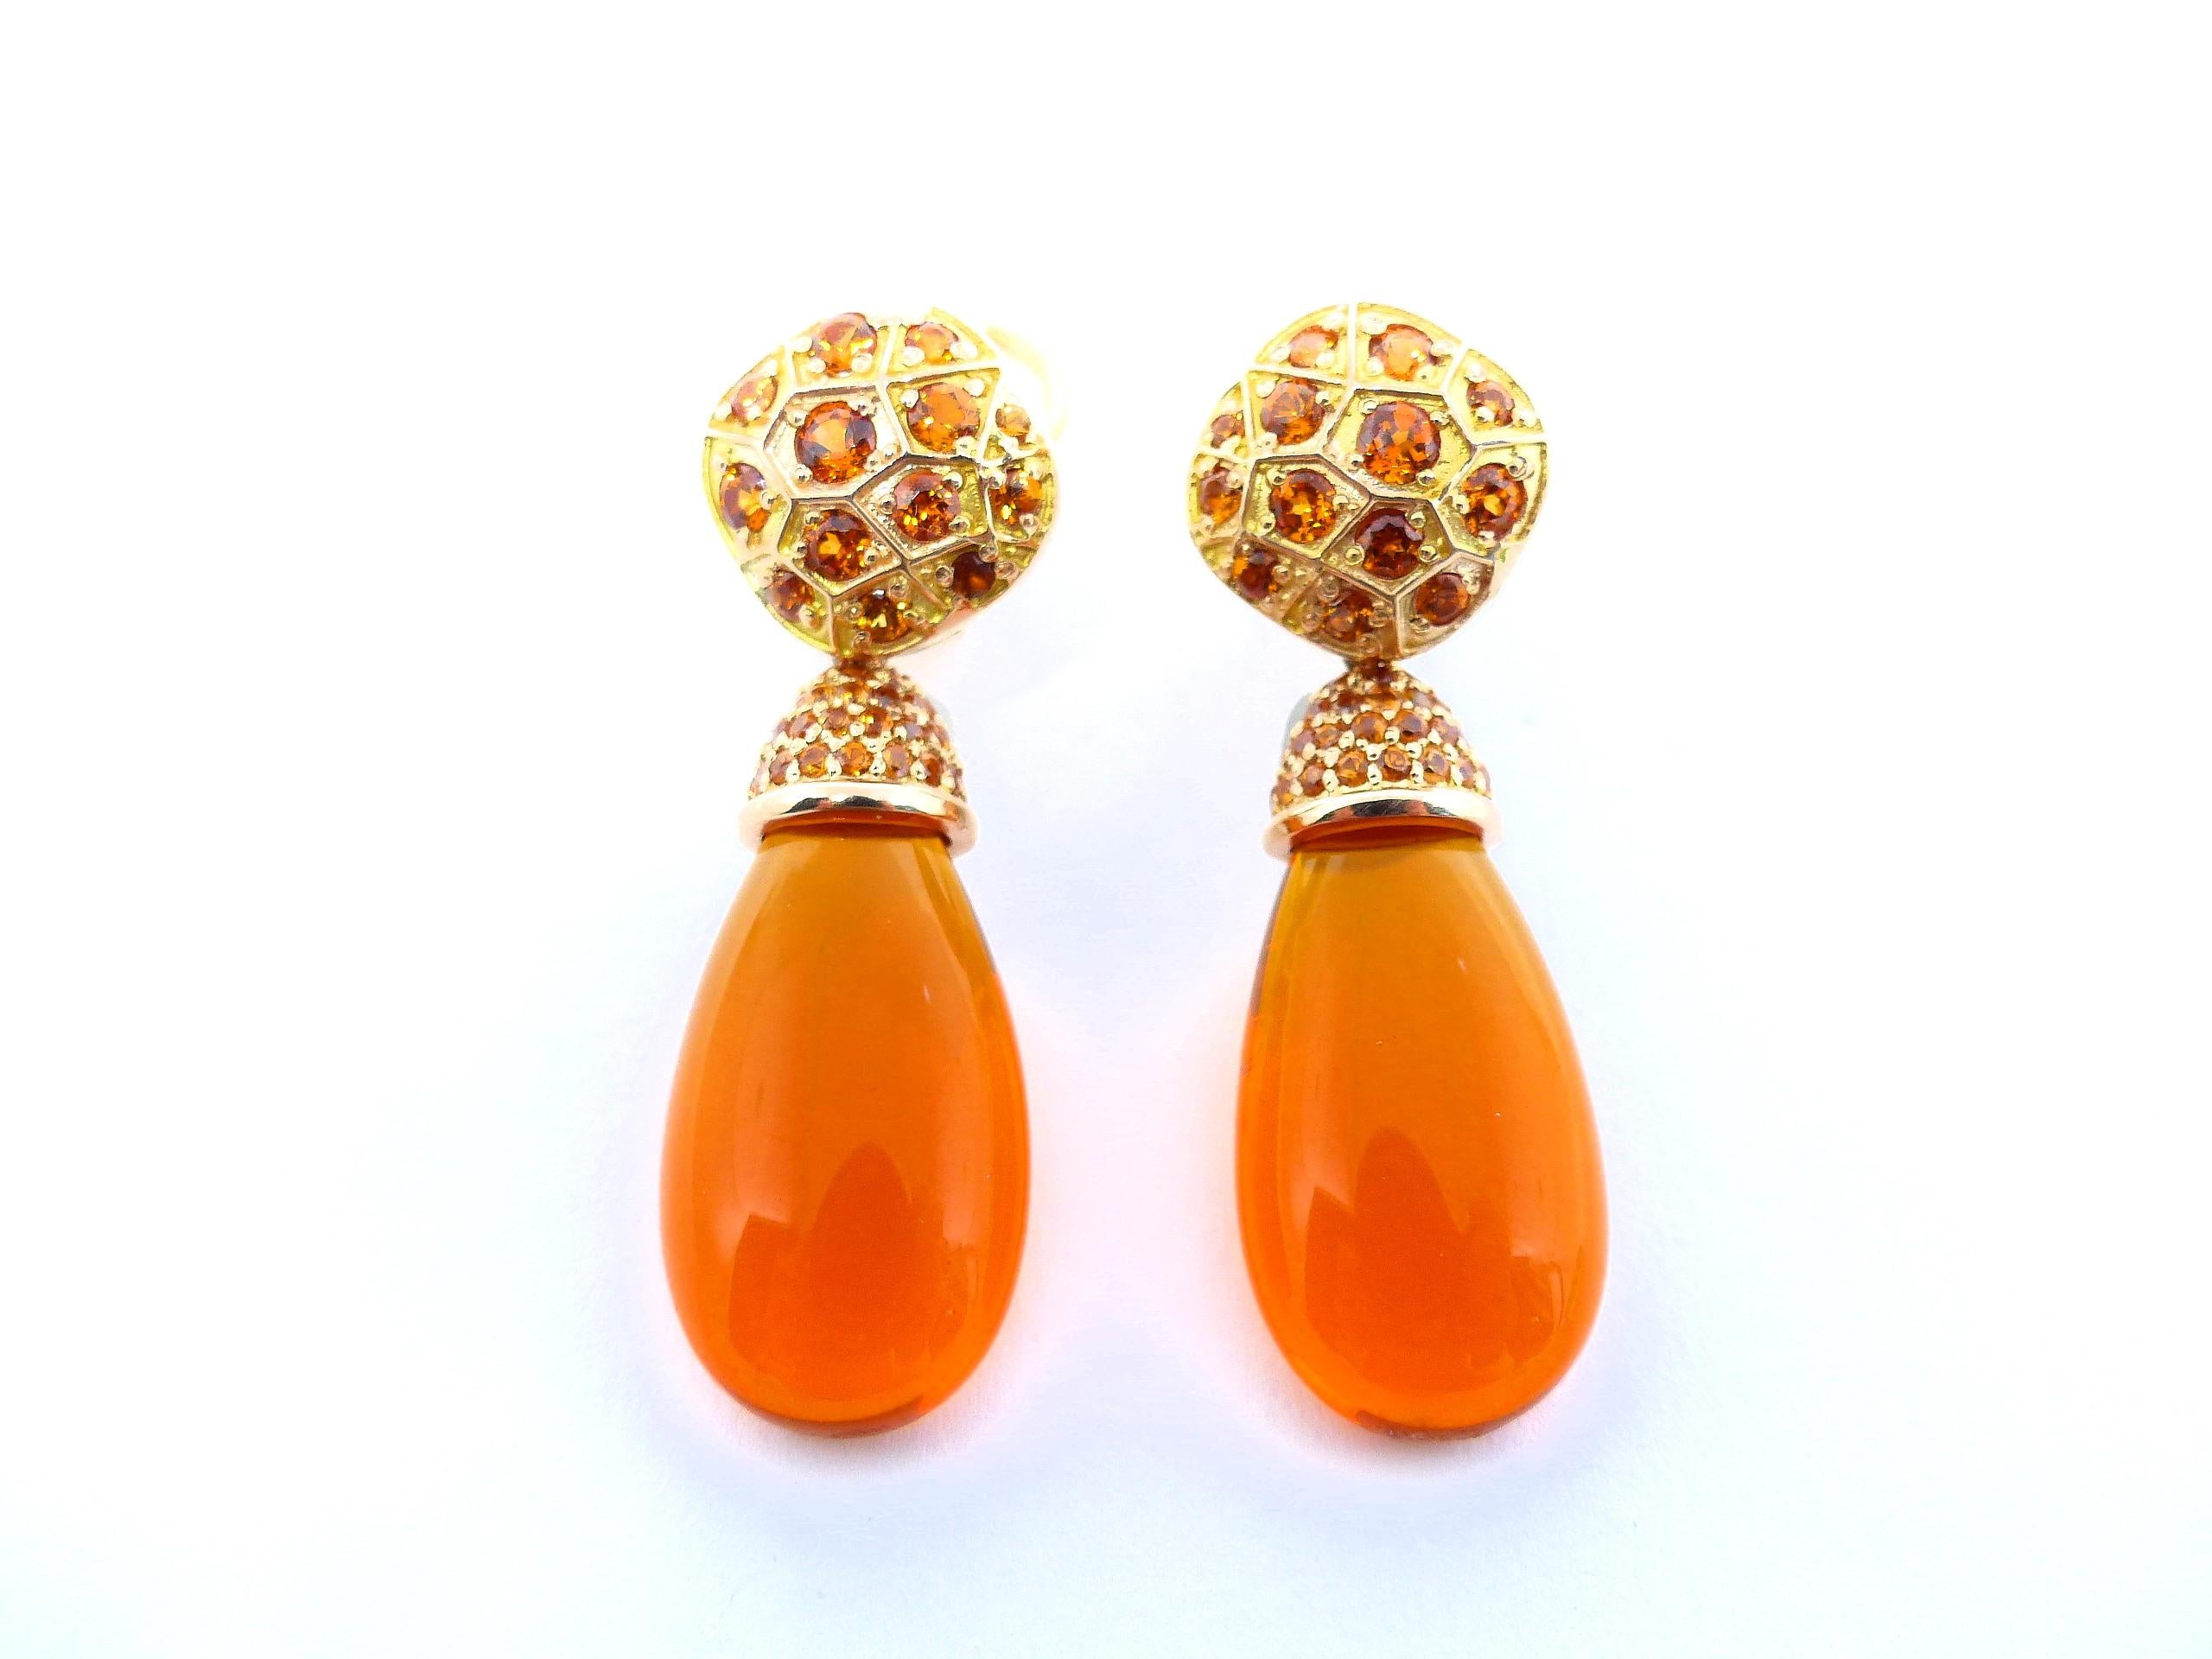 Women's Earrings in Red Gold with 26 Mandarine Garnets 1, 56ct..  For Sale